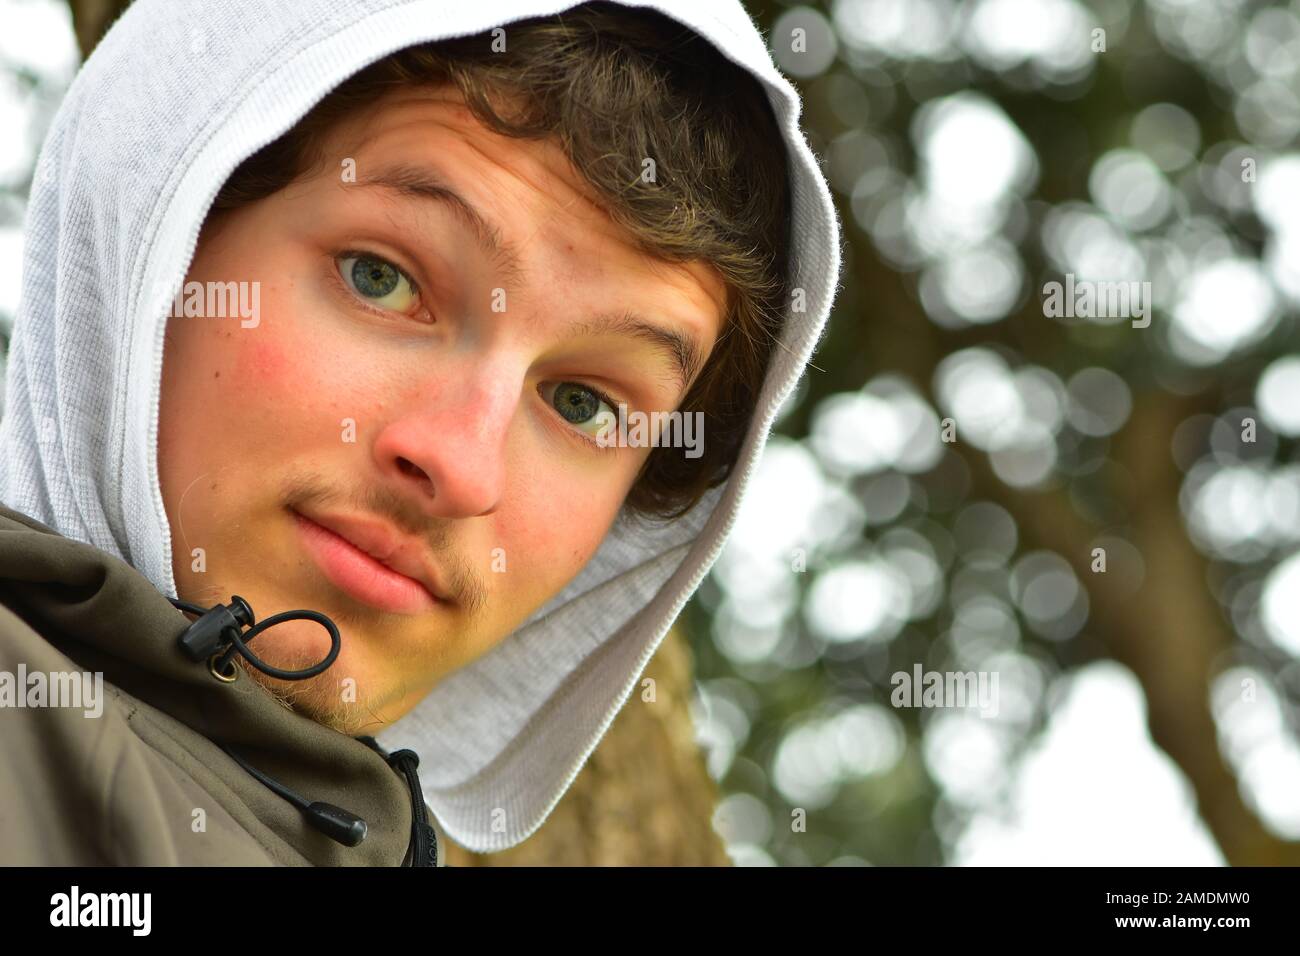 Young Caucasian man wearing hoodie from under jacket. Stock Photo